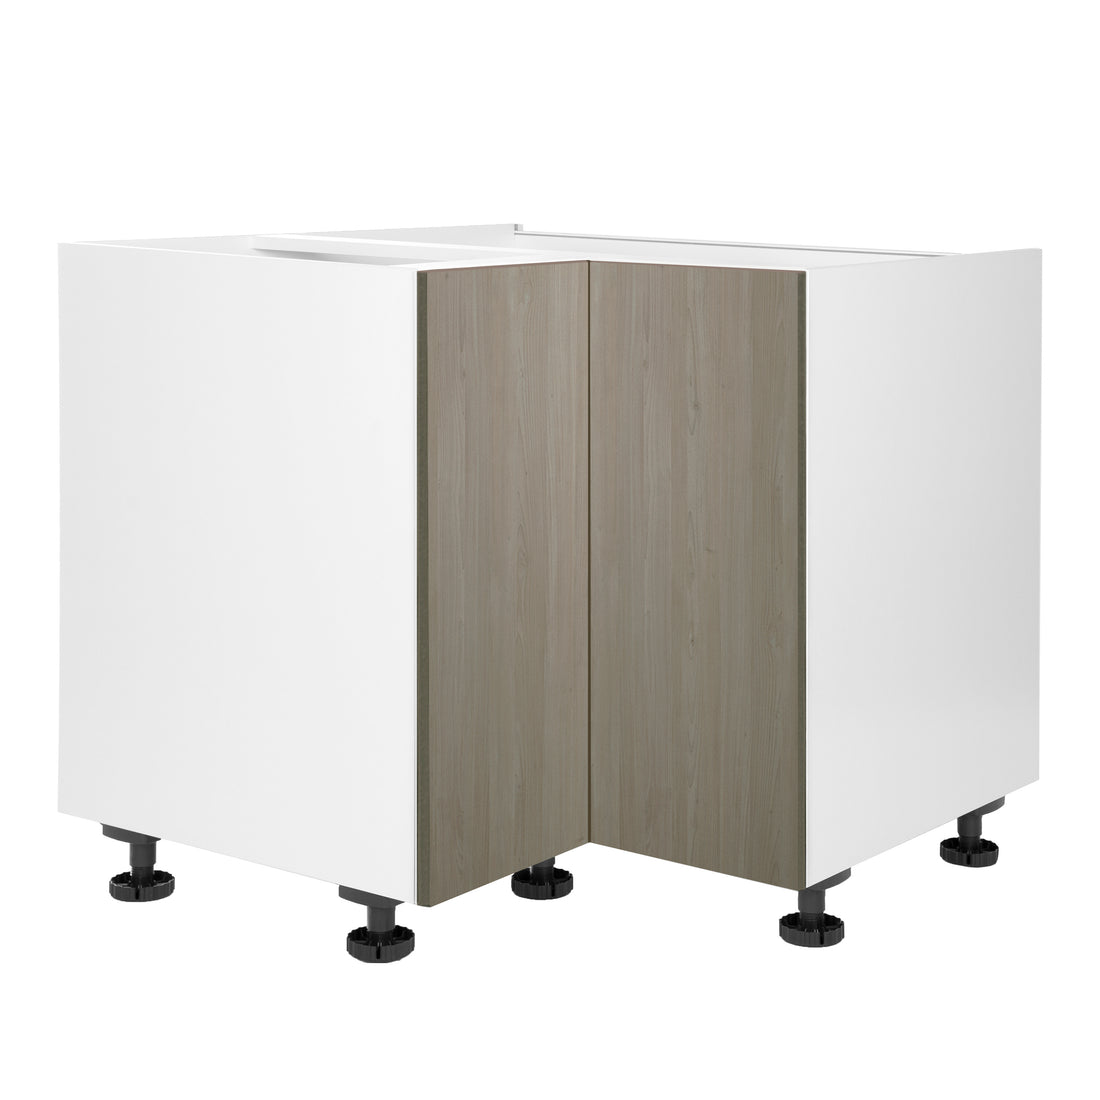 Quick Assemble Modern Style with Soft Close 36 in Lazy Susan Base Kitchen Cabinet (36 in W x 24 in D x 34.50 in H)